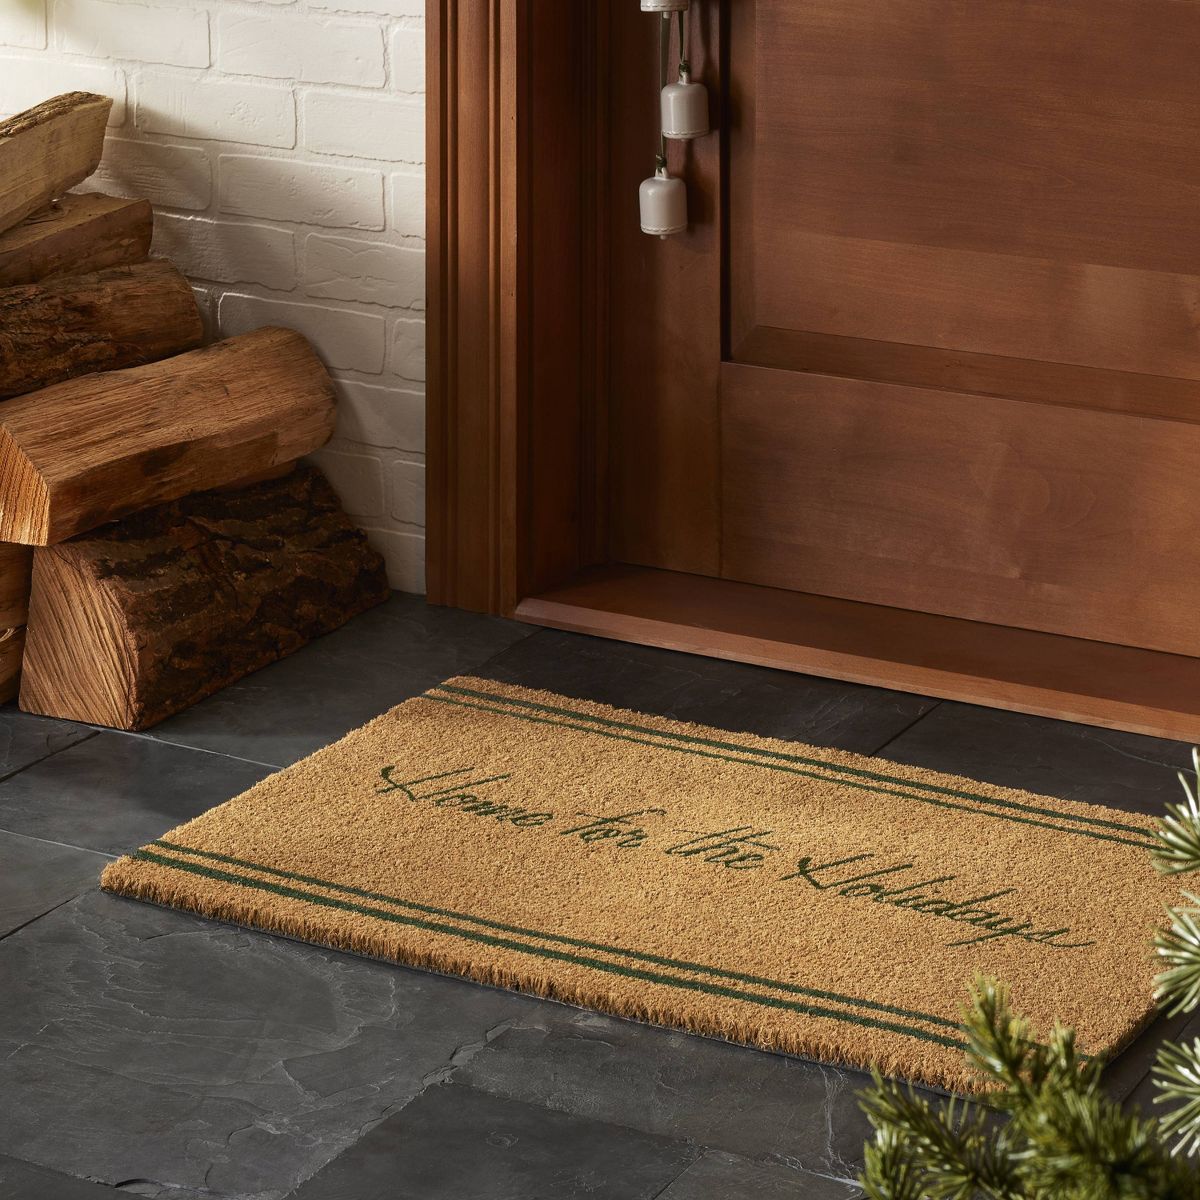 Home for the Holidays Coir Christmas Doormat Tan/Evergreen - Hearth & Hand™ with Magnolia | Target